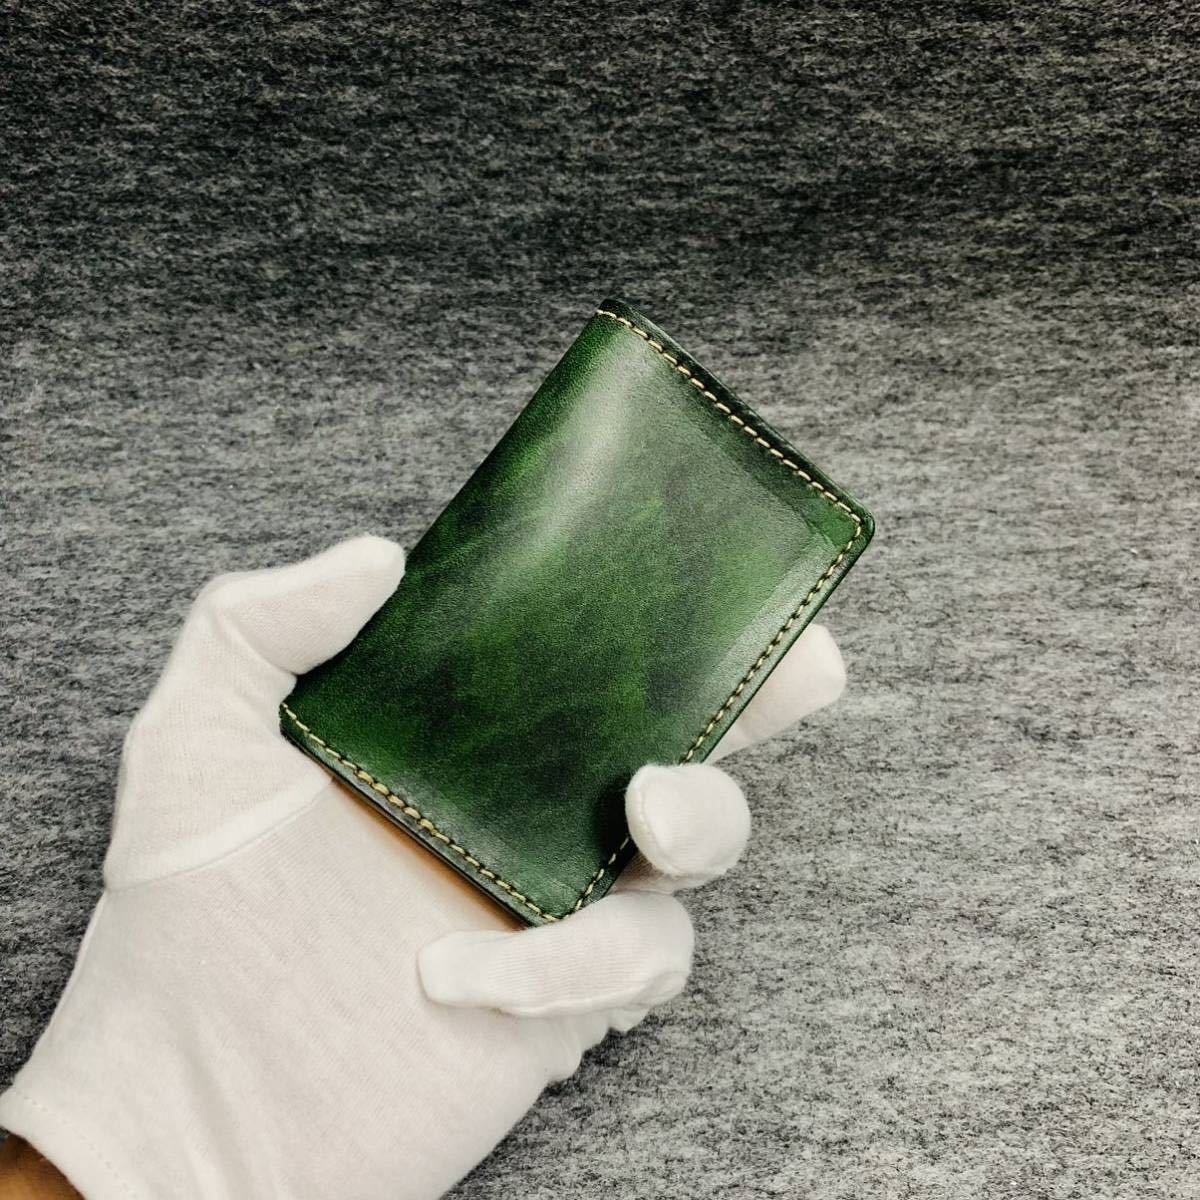  green [ green ] men's card-case card inserting ticket holder cow leather original leather card-case men's purse cow leather business 1 jpy free shipping Advan leather 